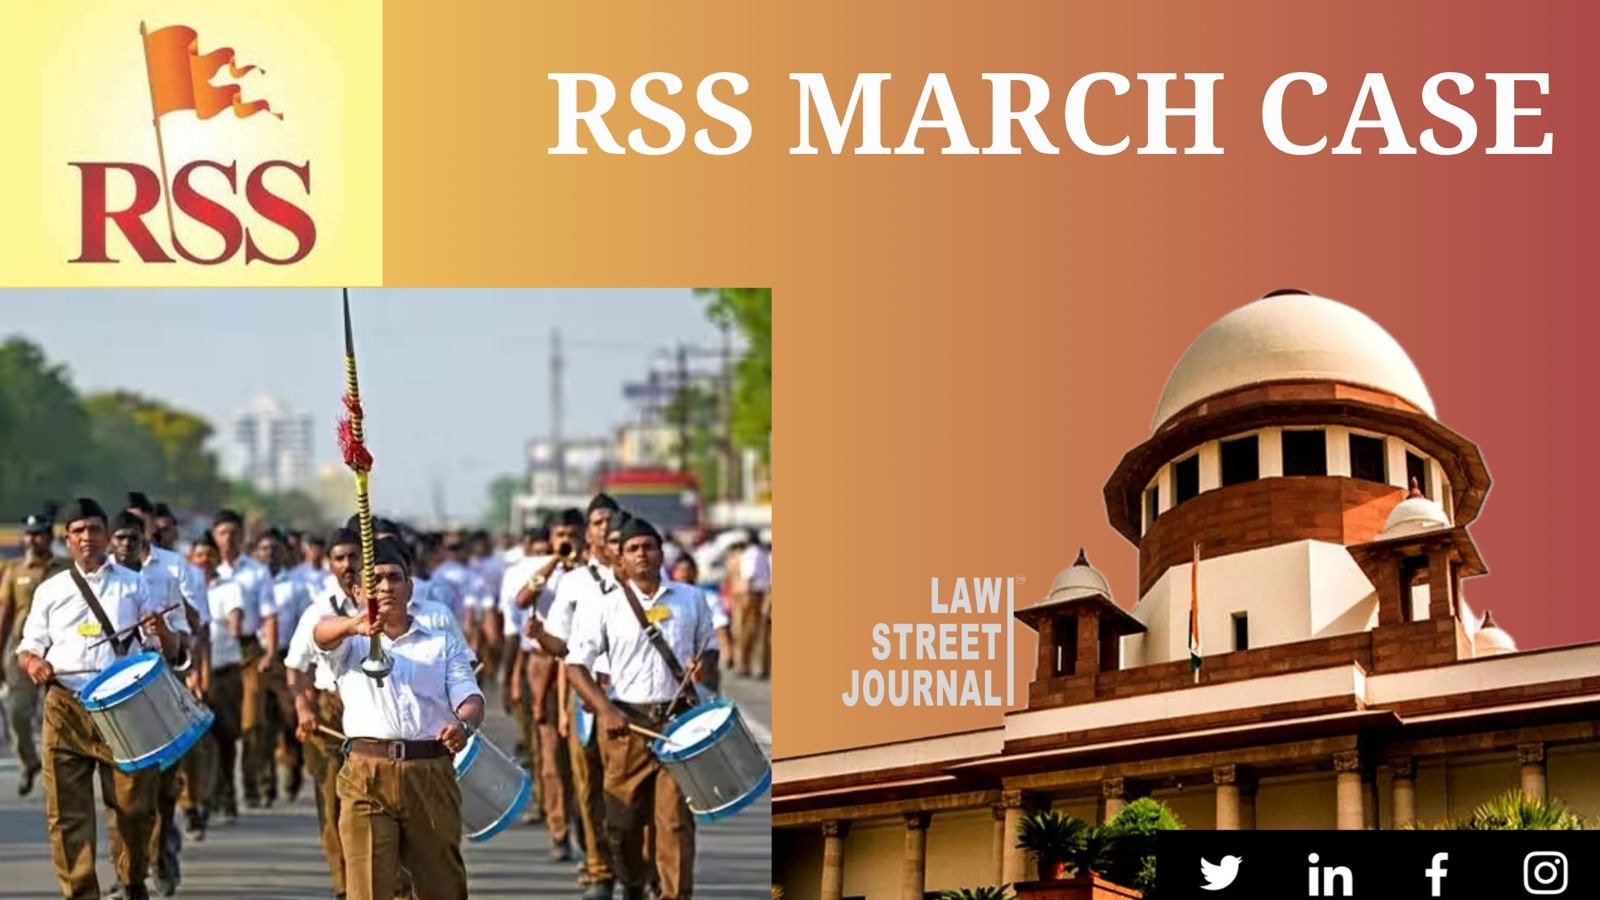 Supreme Court tells TN govt to allow RSS route March 